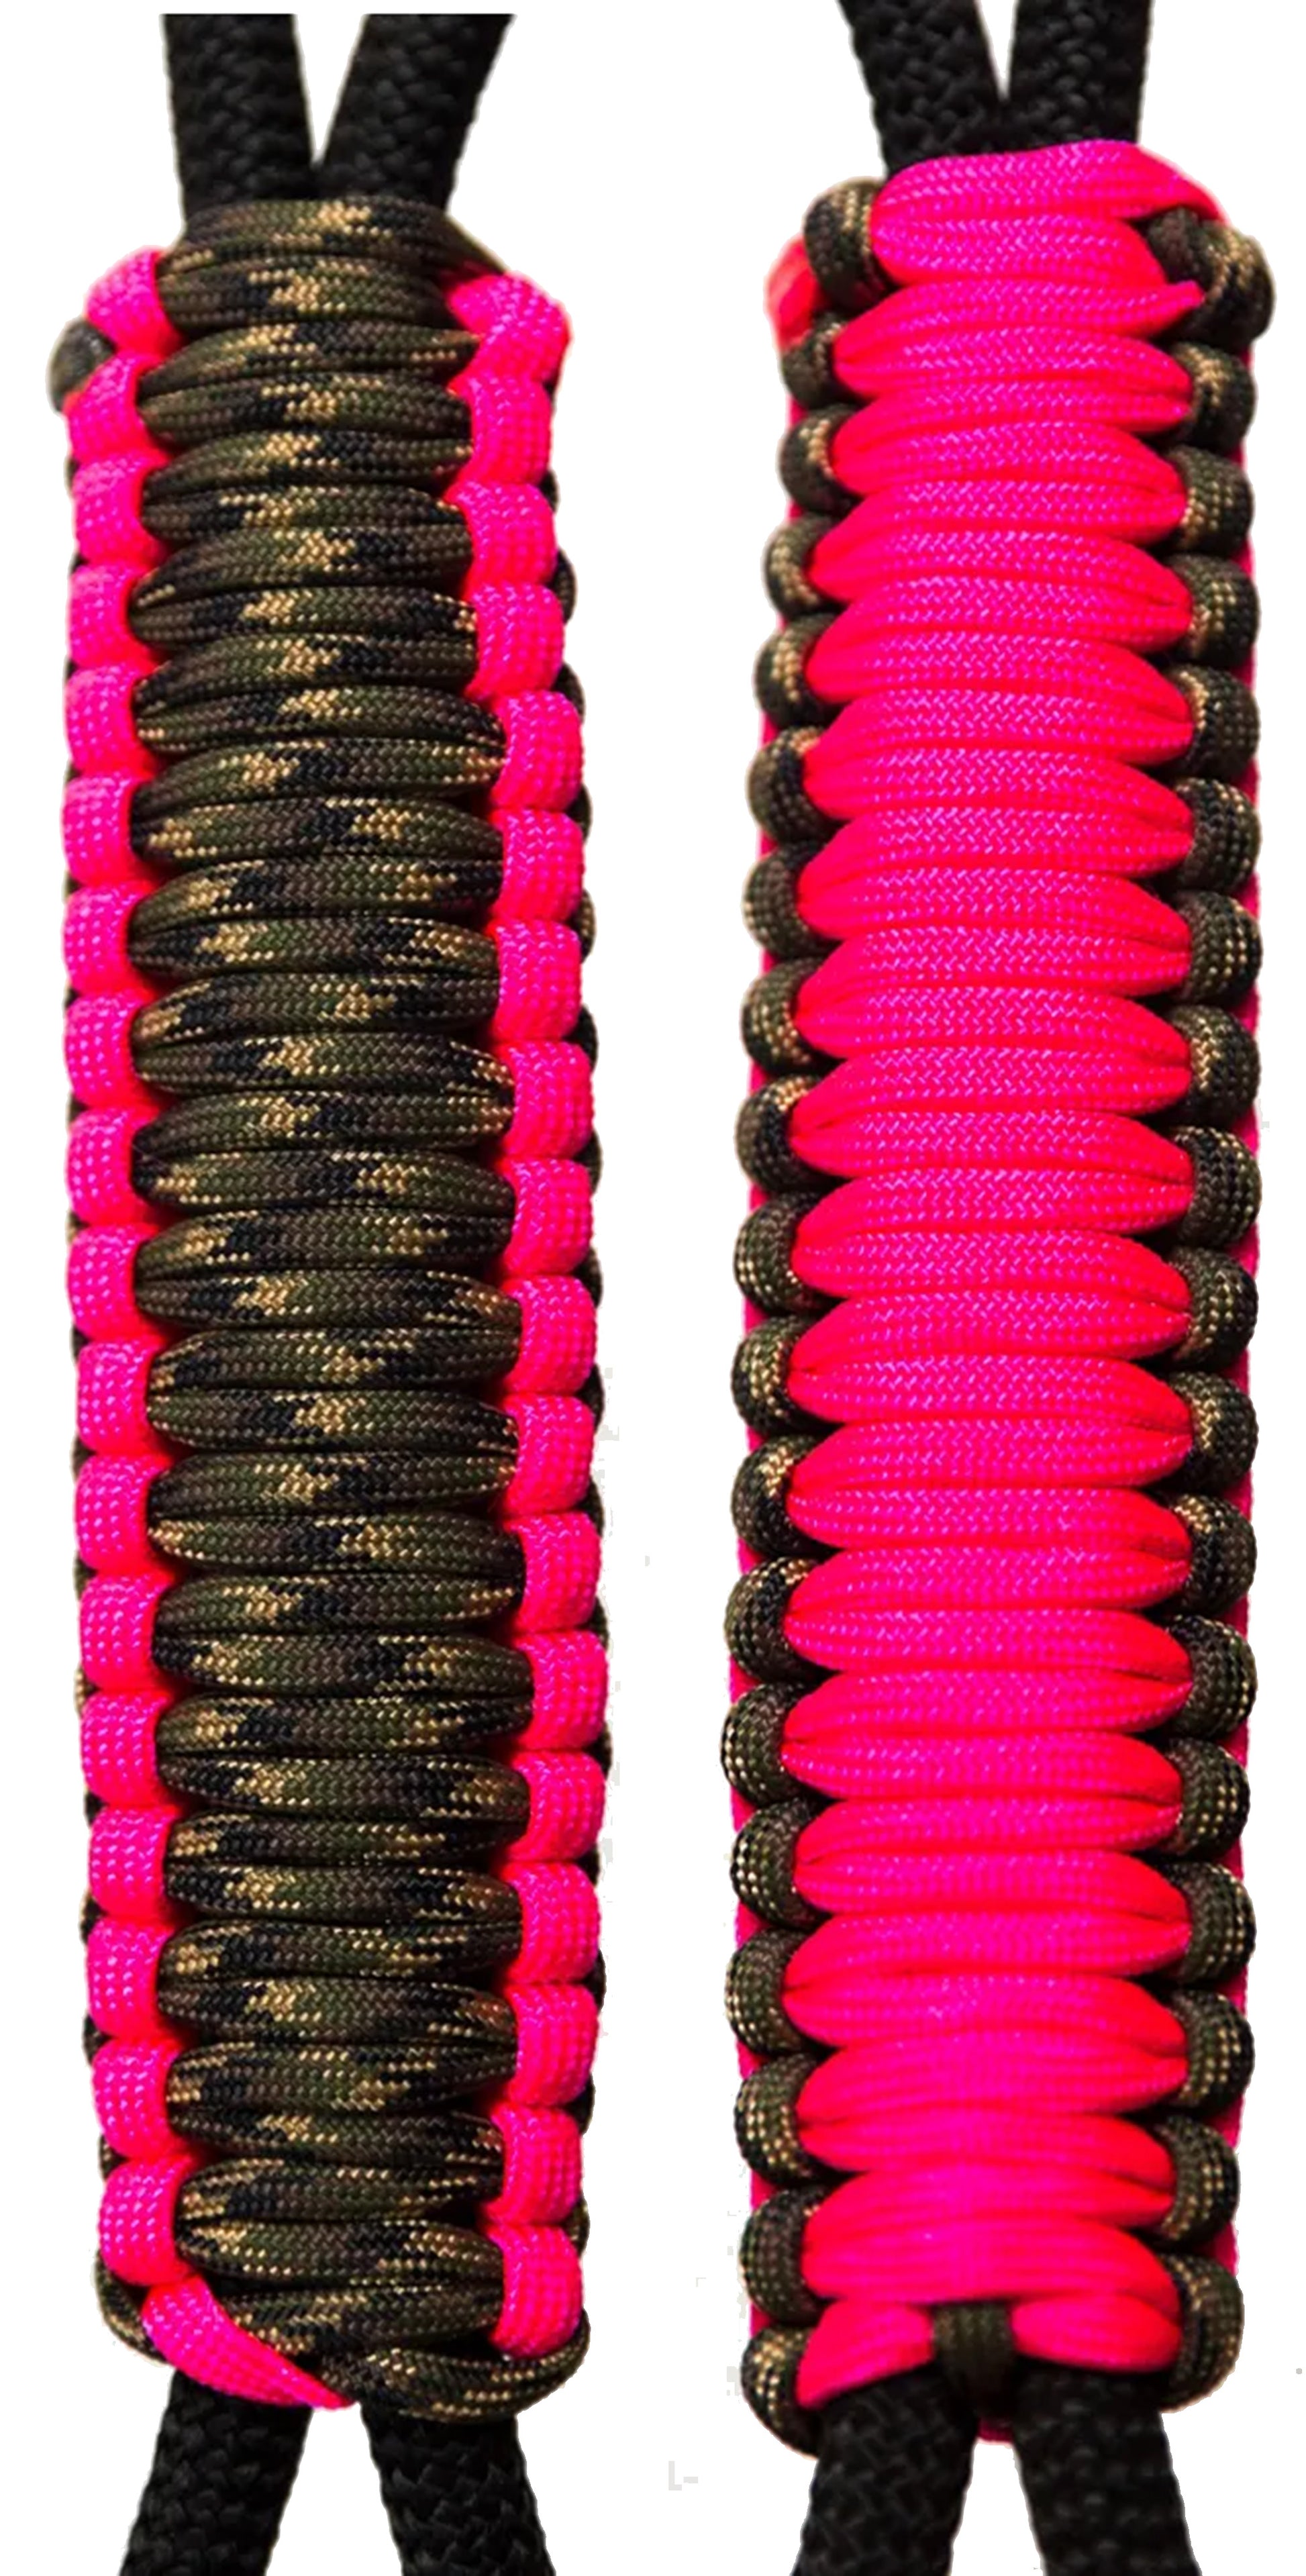 Paracord Handmade Handles for Stainless Steel Tumblers - Made in USA!